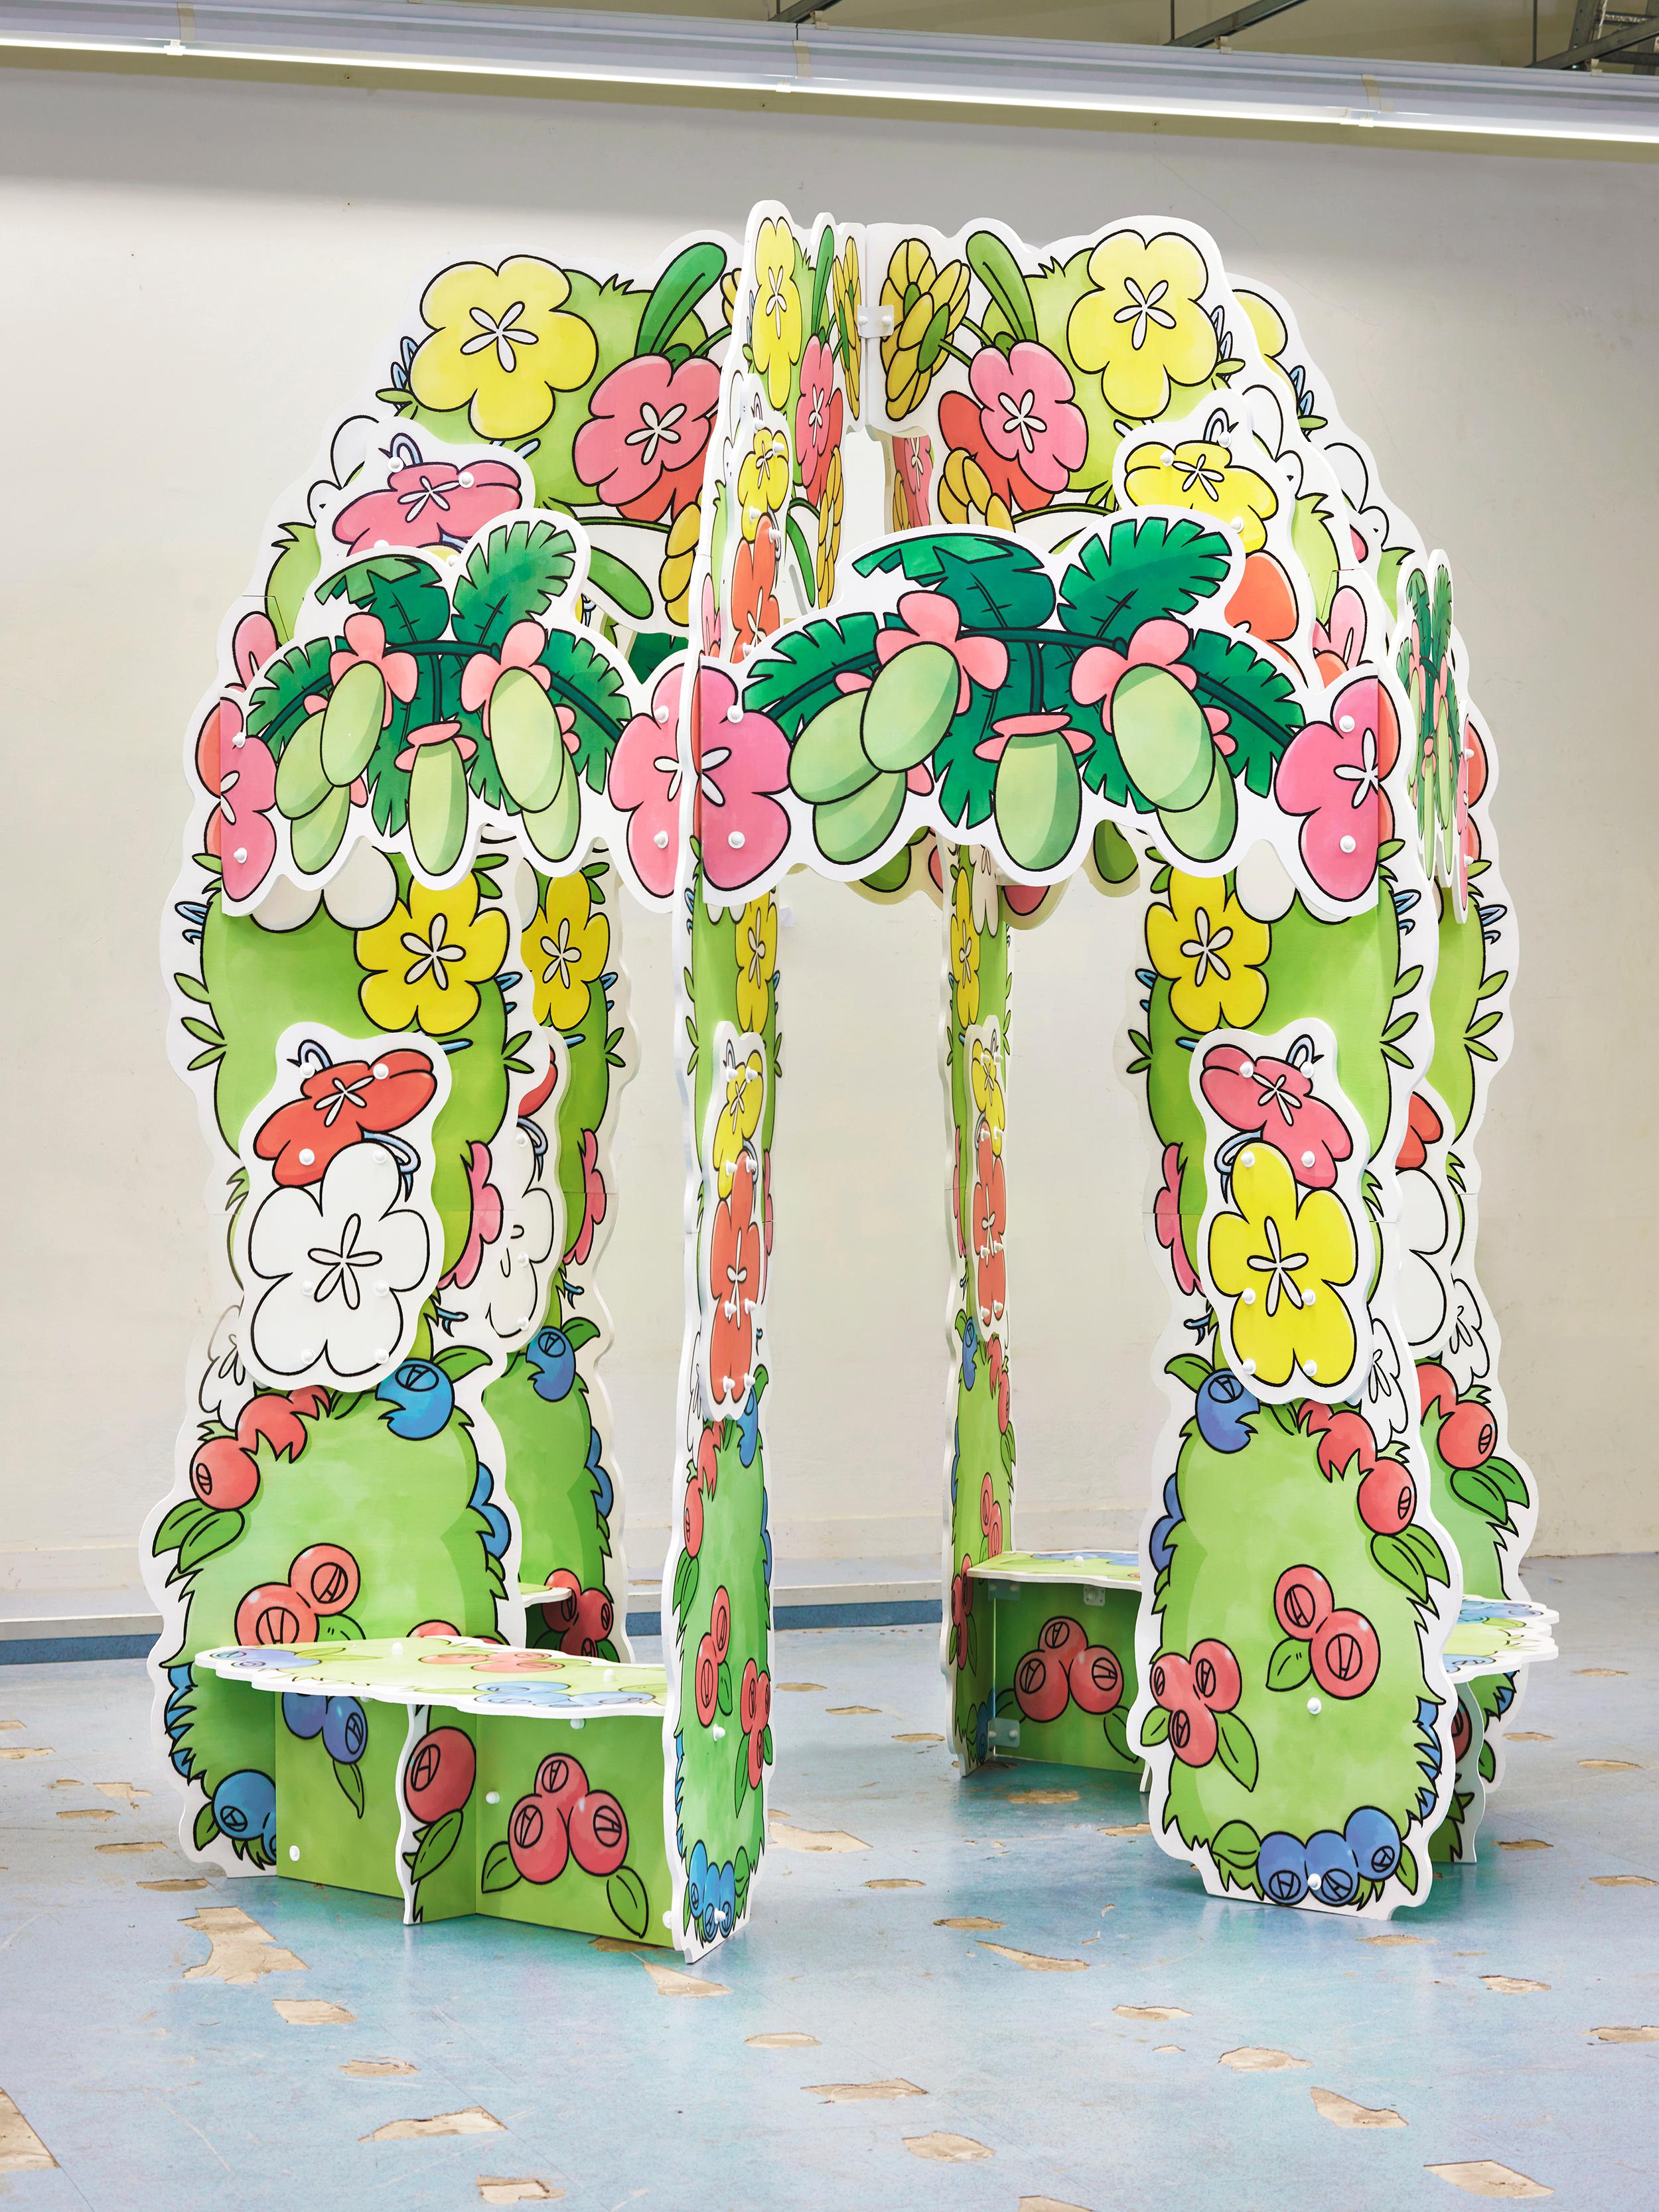 Plush Garden Gazebo.
Handcrafted and laser-cut plywood with a UV-printed floral pattern, marine varnished. Unique handcrafted and casted connection pieces.

Plush Garden is a visual research on plants as ambiguous objects of
trade and